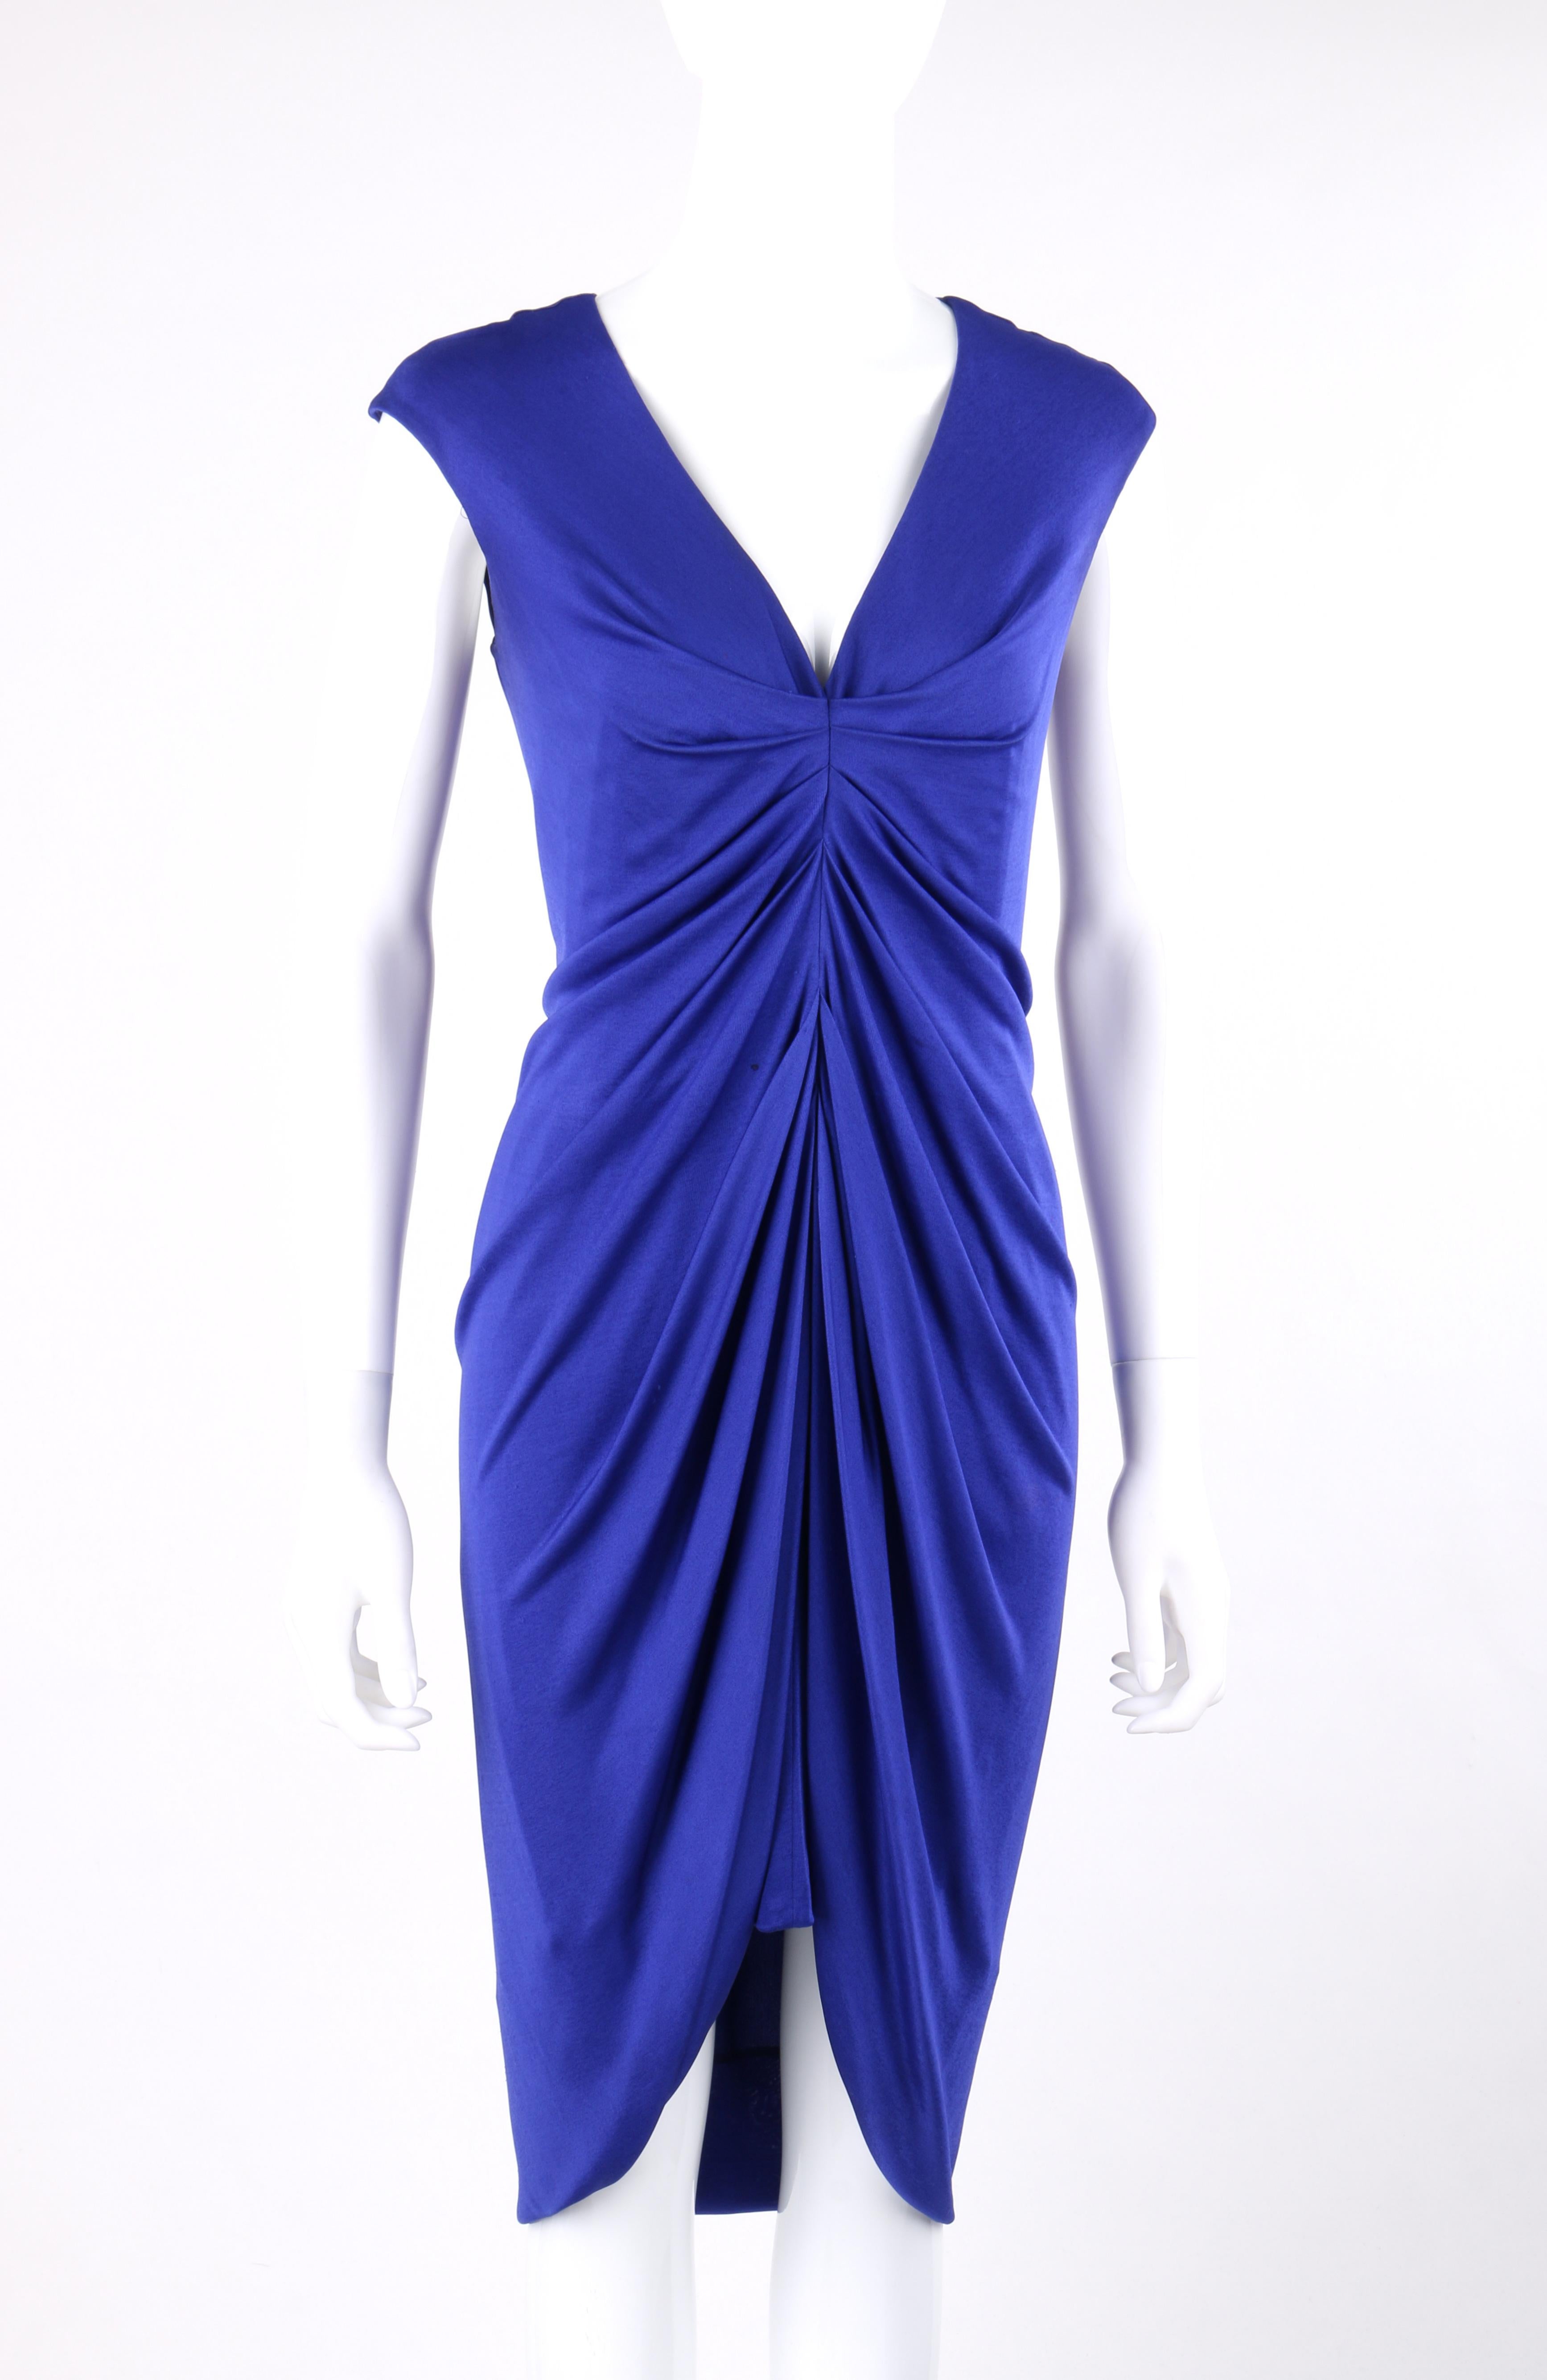 ALEXANDER McQUEEN 2010 Royal Blue Silk High Low Ruched Body-Con Dress
  
Brand / Manufacturer: Alexander McQueen
Style: Ruched body-con dress
Color(s): Sapphire Blue
Lined: Yes     
Marked Fabric Content: Composition: Rayon; 25% Silk. Lining: 75%